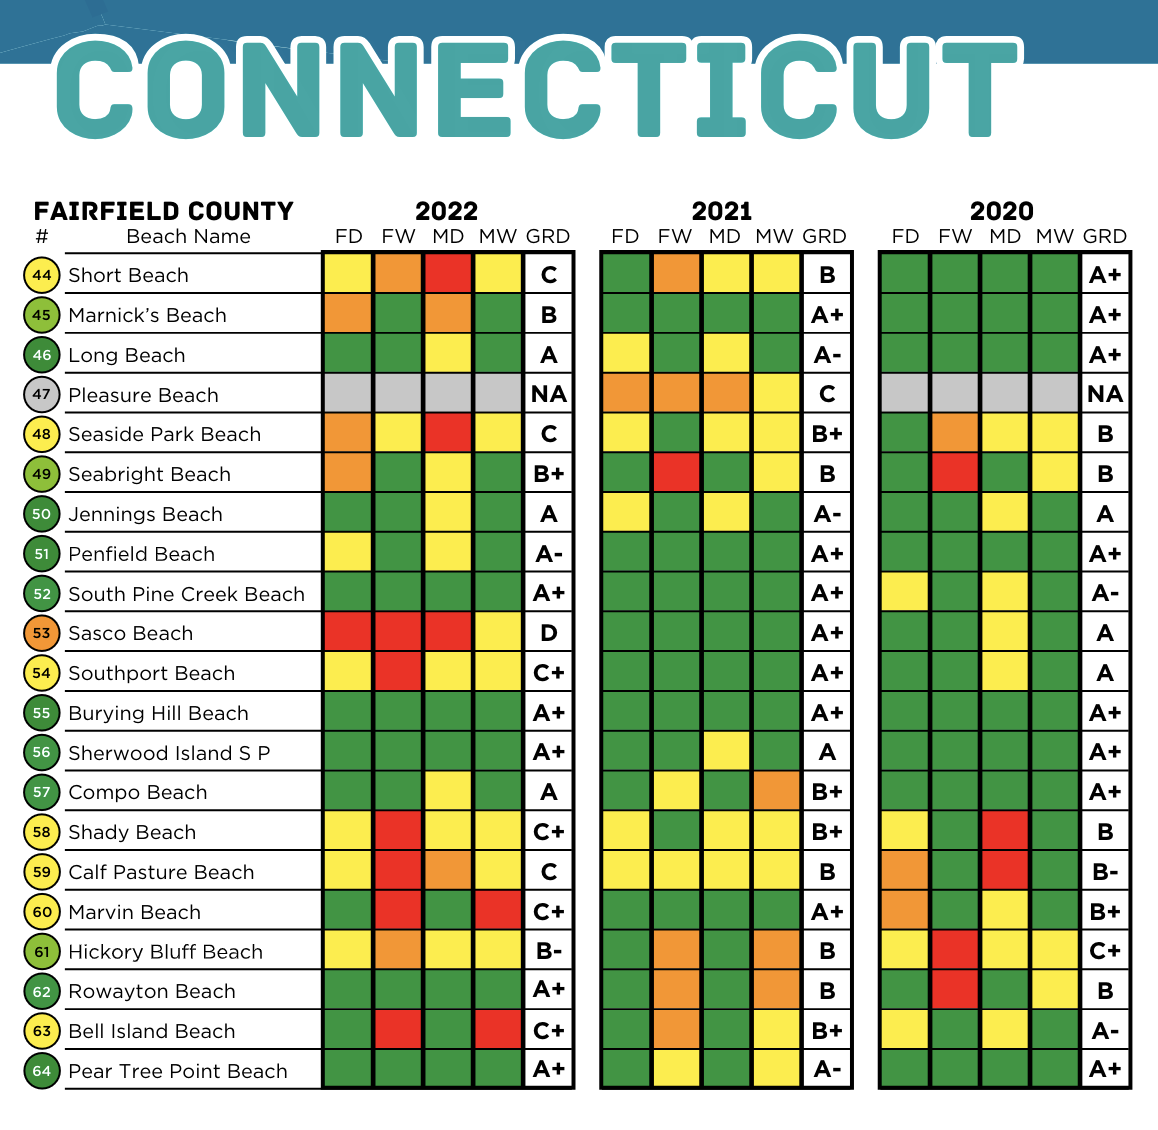 A chart showing the water quality grades in southwest Connecticut